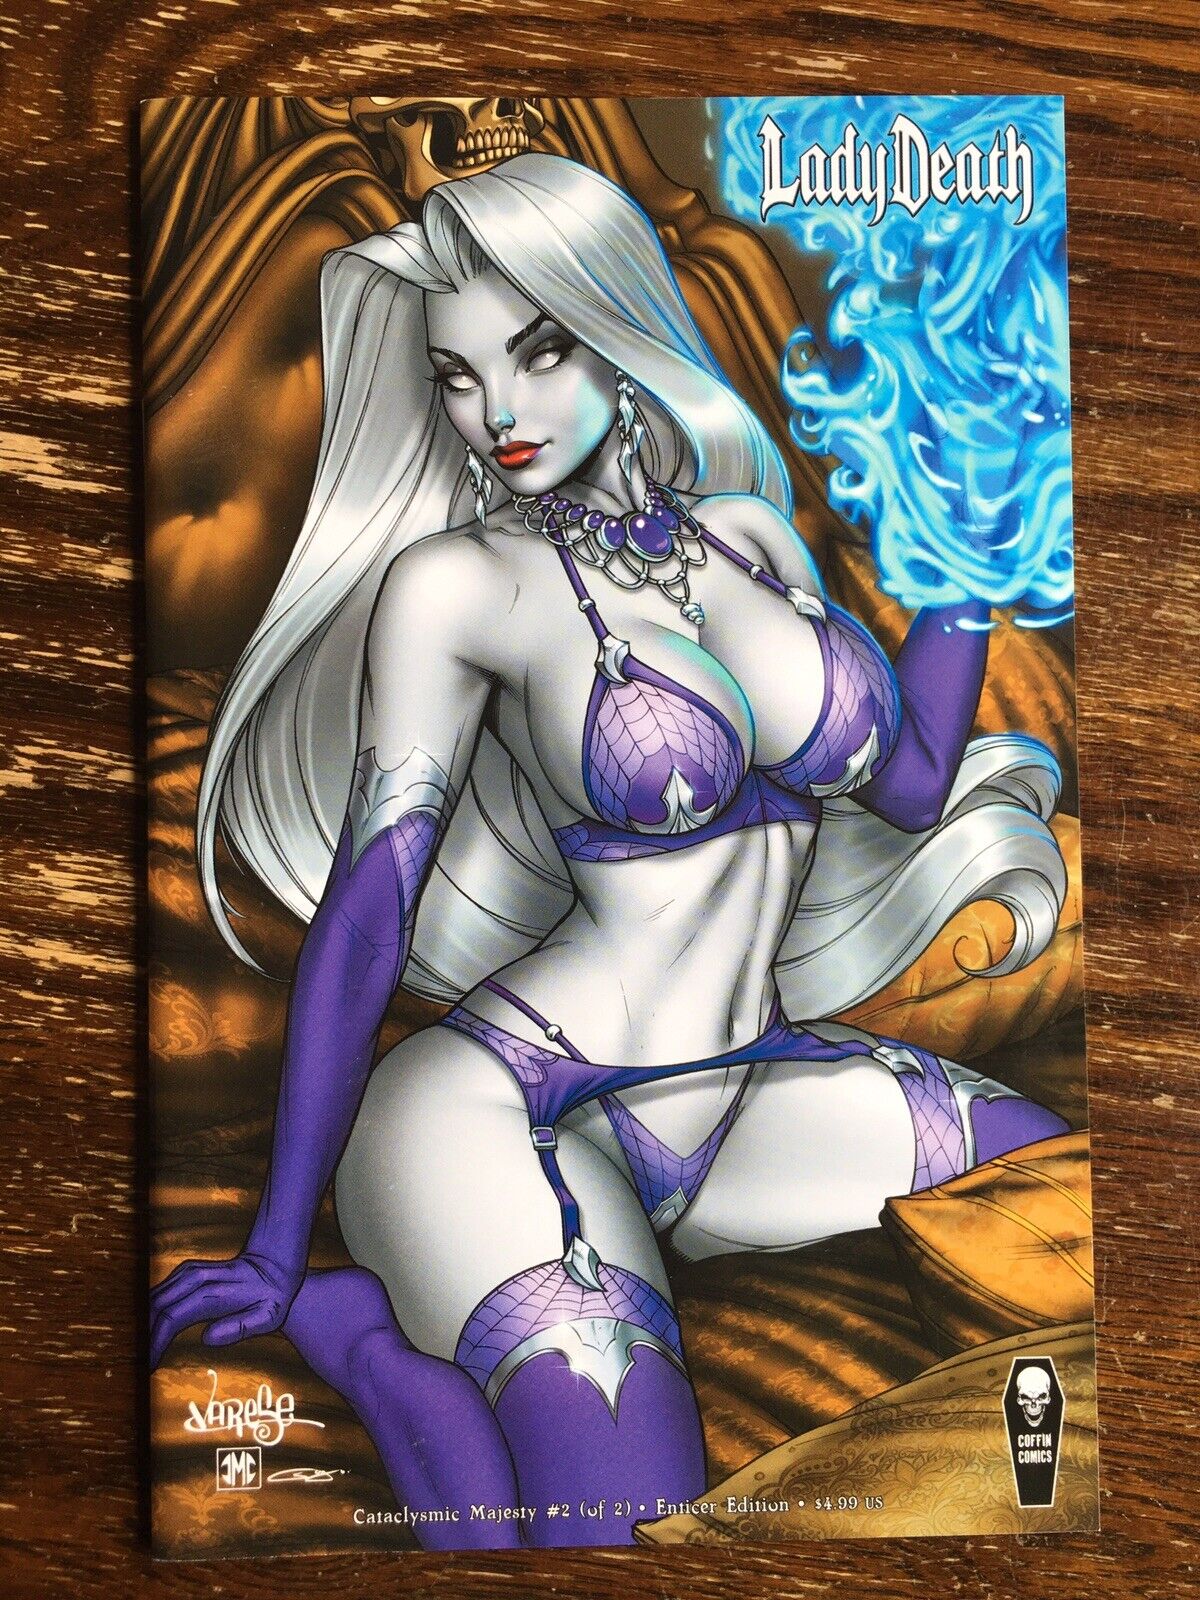 LADY DEATH CATACLYSMIC MAJESTY 2 ENTICER EDITION COFFIN COMICS